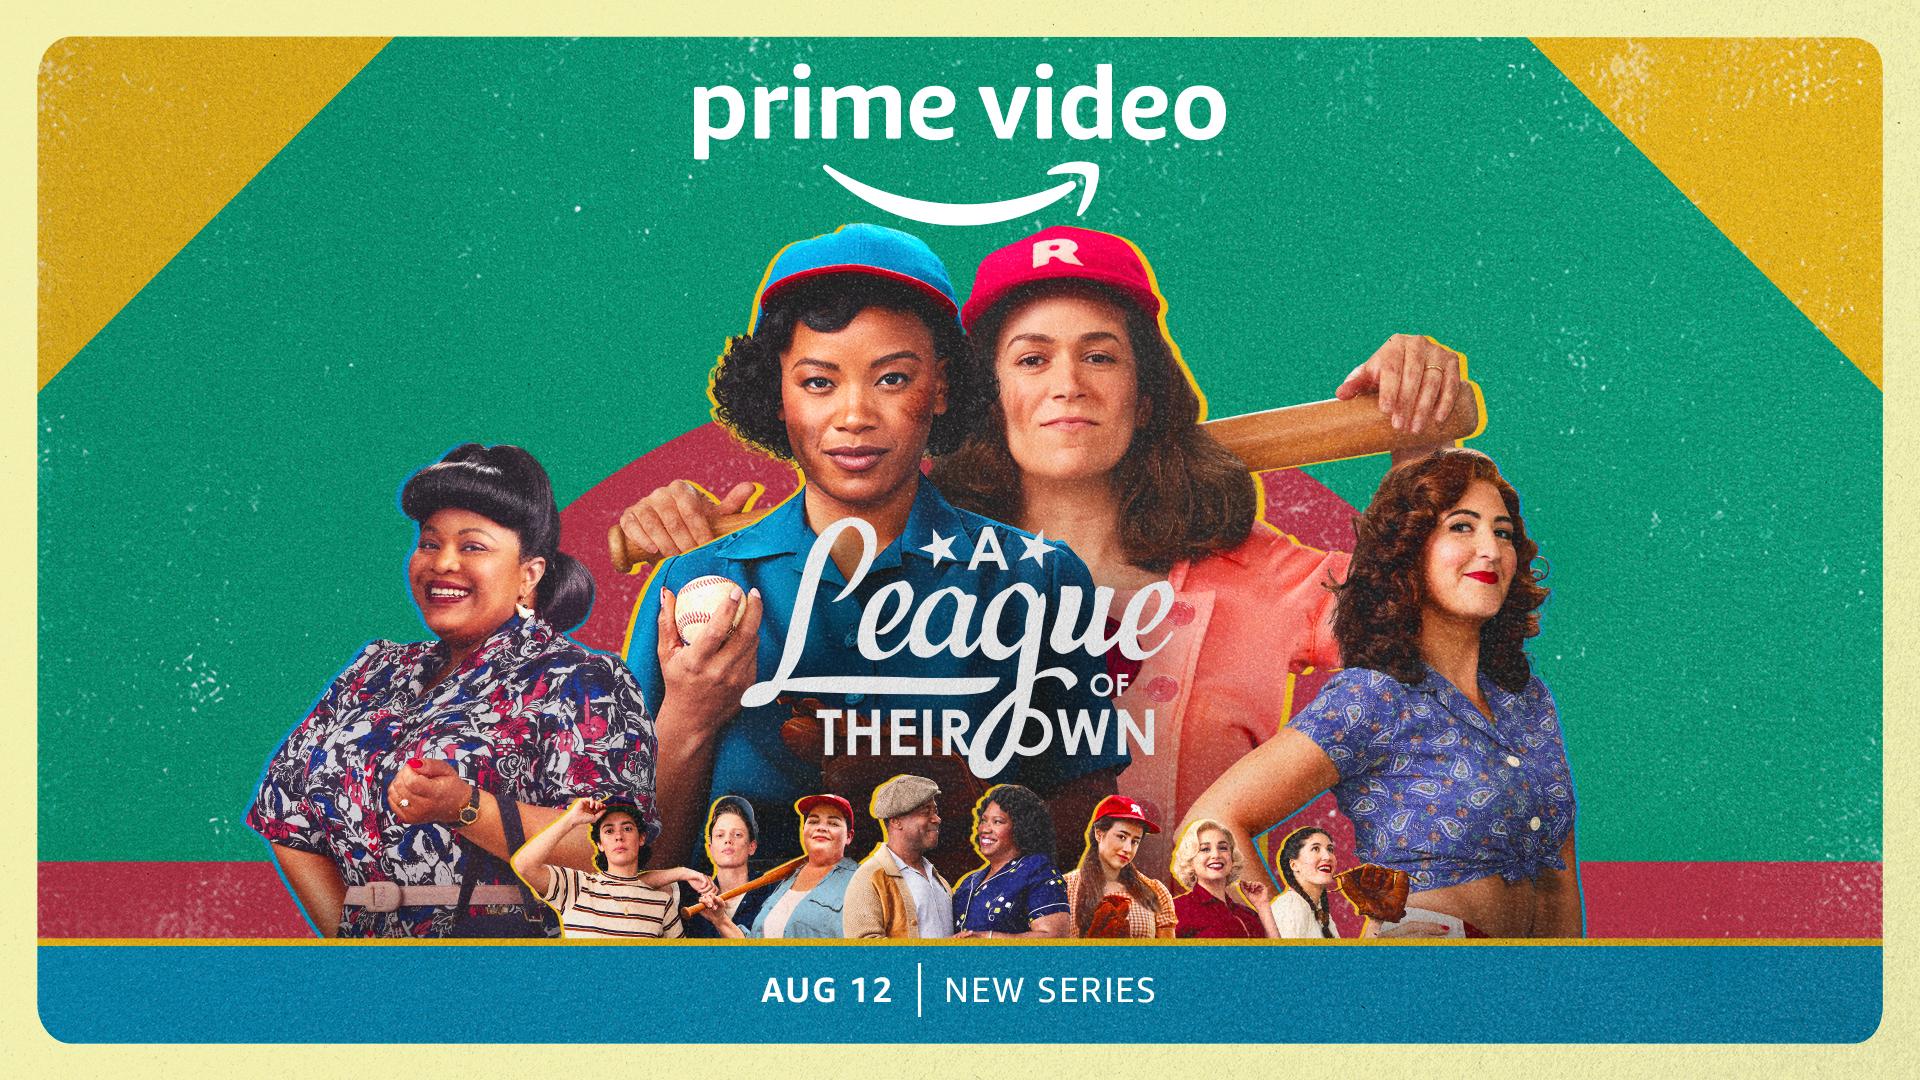 Got Game? Prime Video Releases Official Trailer for A League of Their Own. All eight episodes of the anticipated series premiere August 12 on Prime Video. #FindYourTeam #LeagueOfTheirOwn @LeagueOnPrime